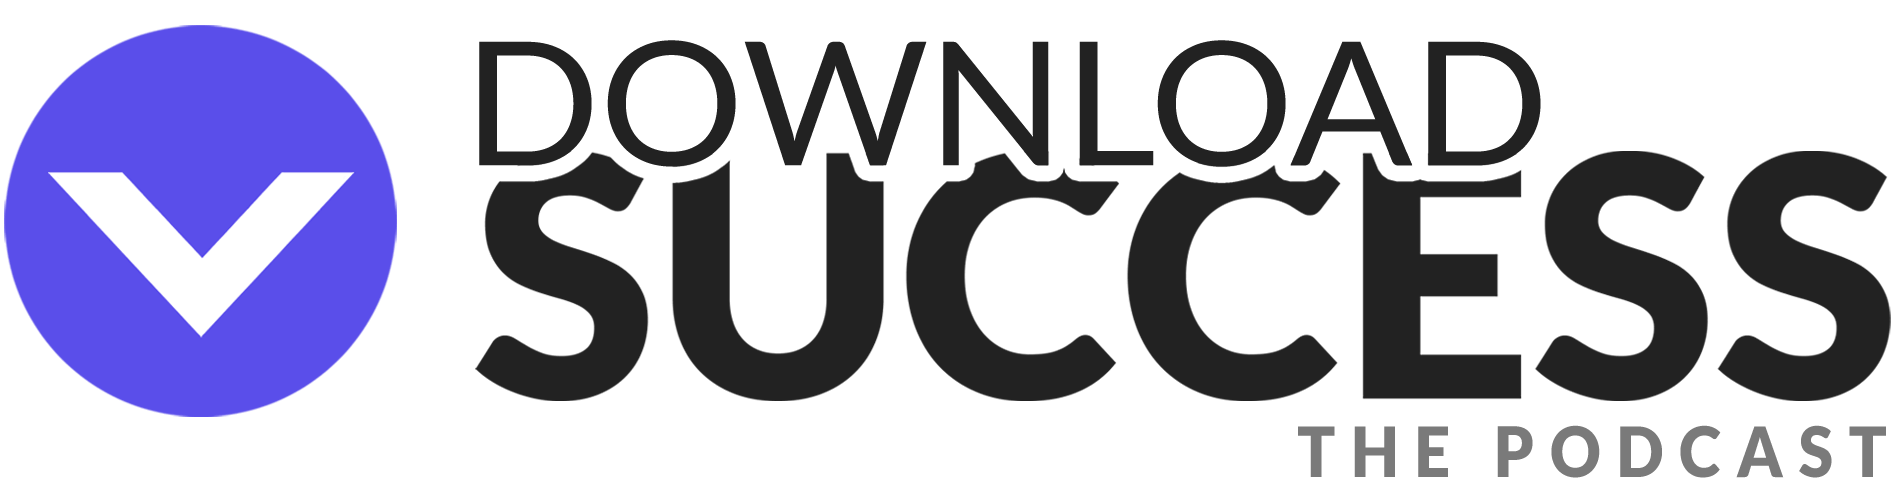 logo for the download success podcast, a motivational & inspirational podcast for business owners and entrepreneurs